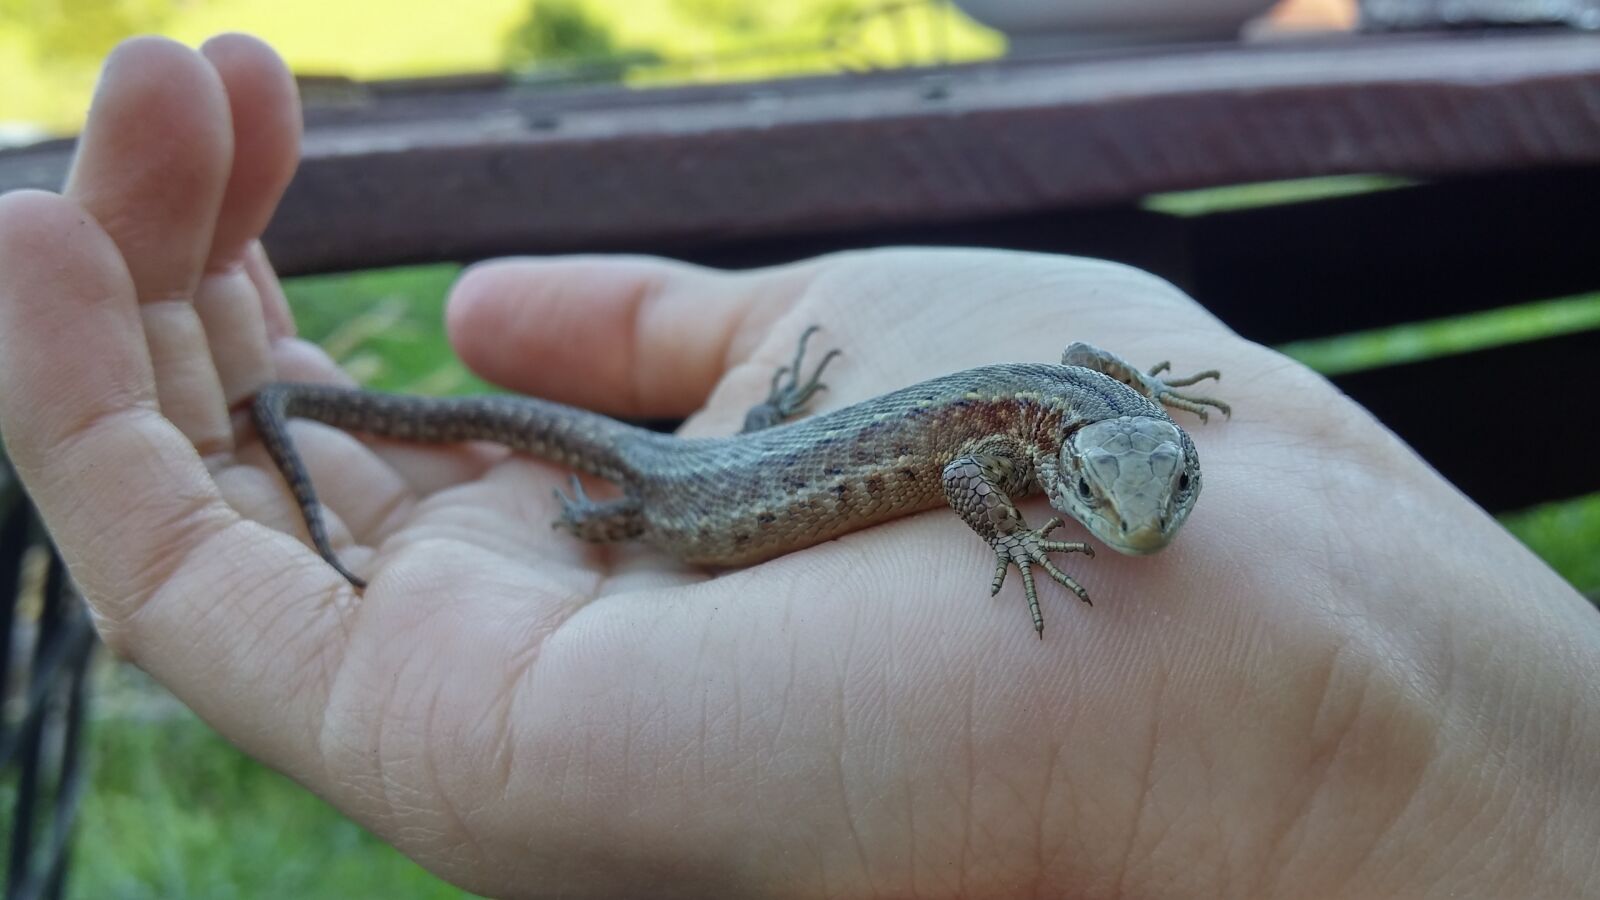 LG D855 sample photo. The lizard, hand, nature photography